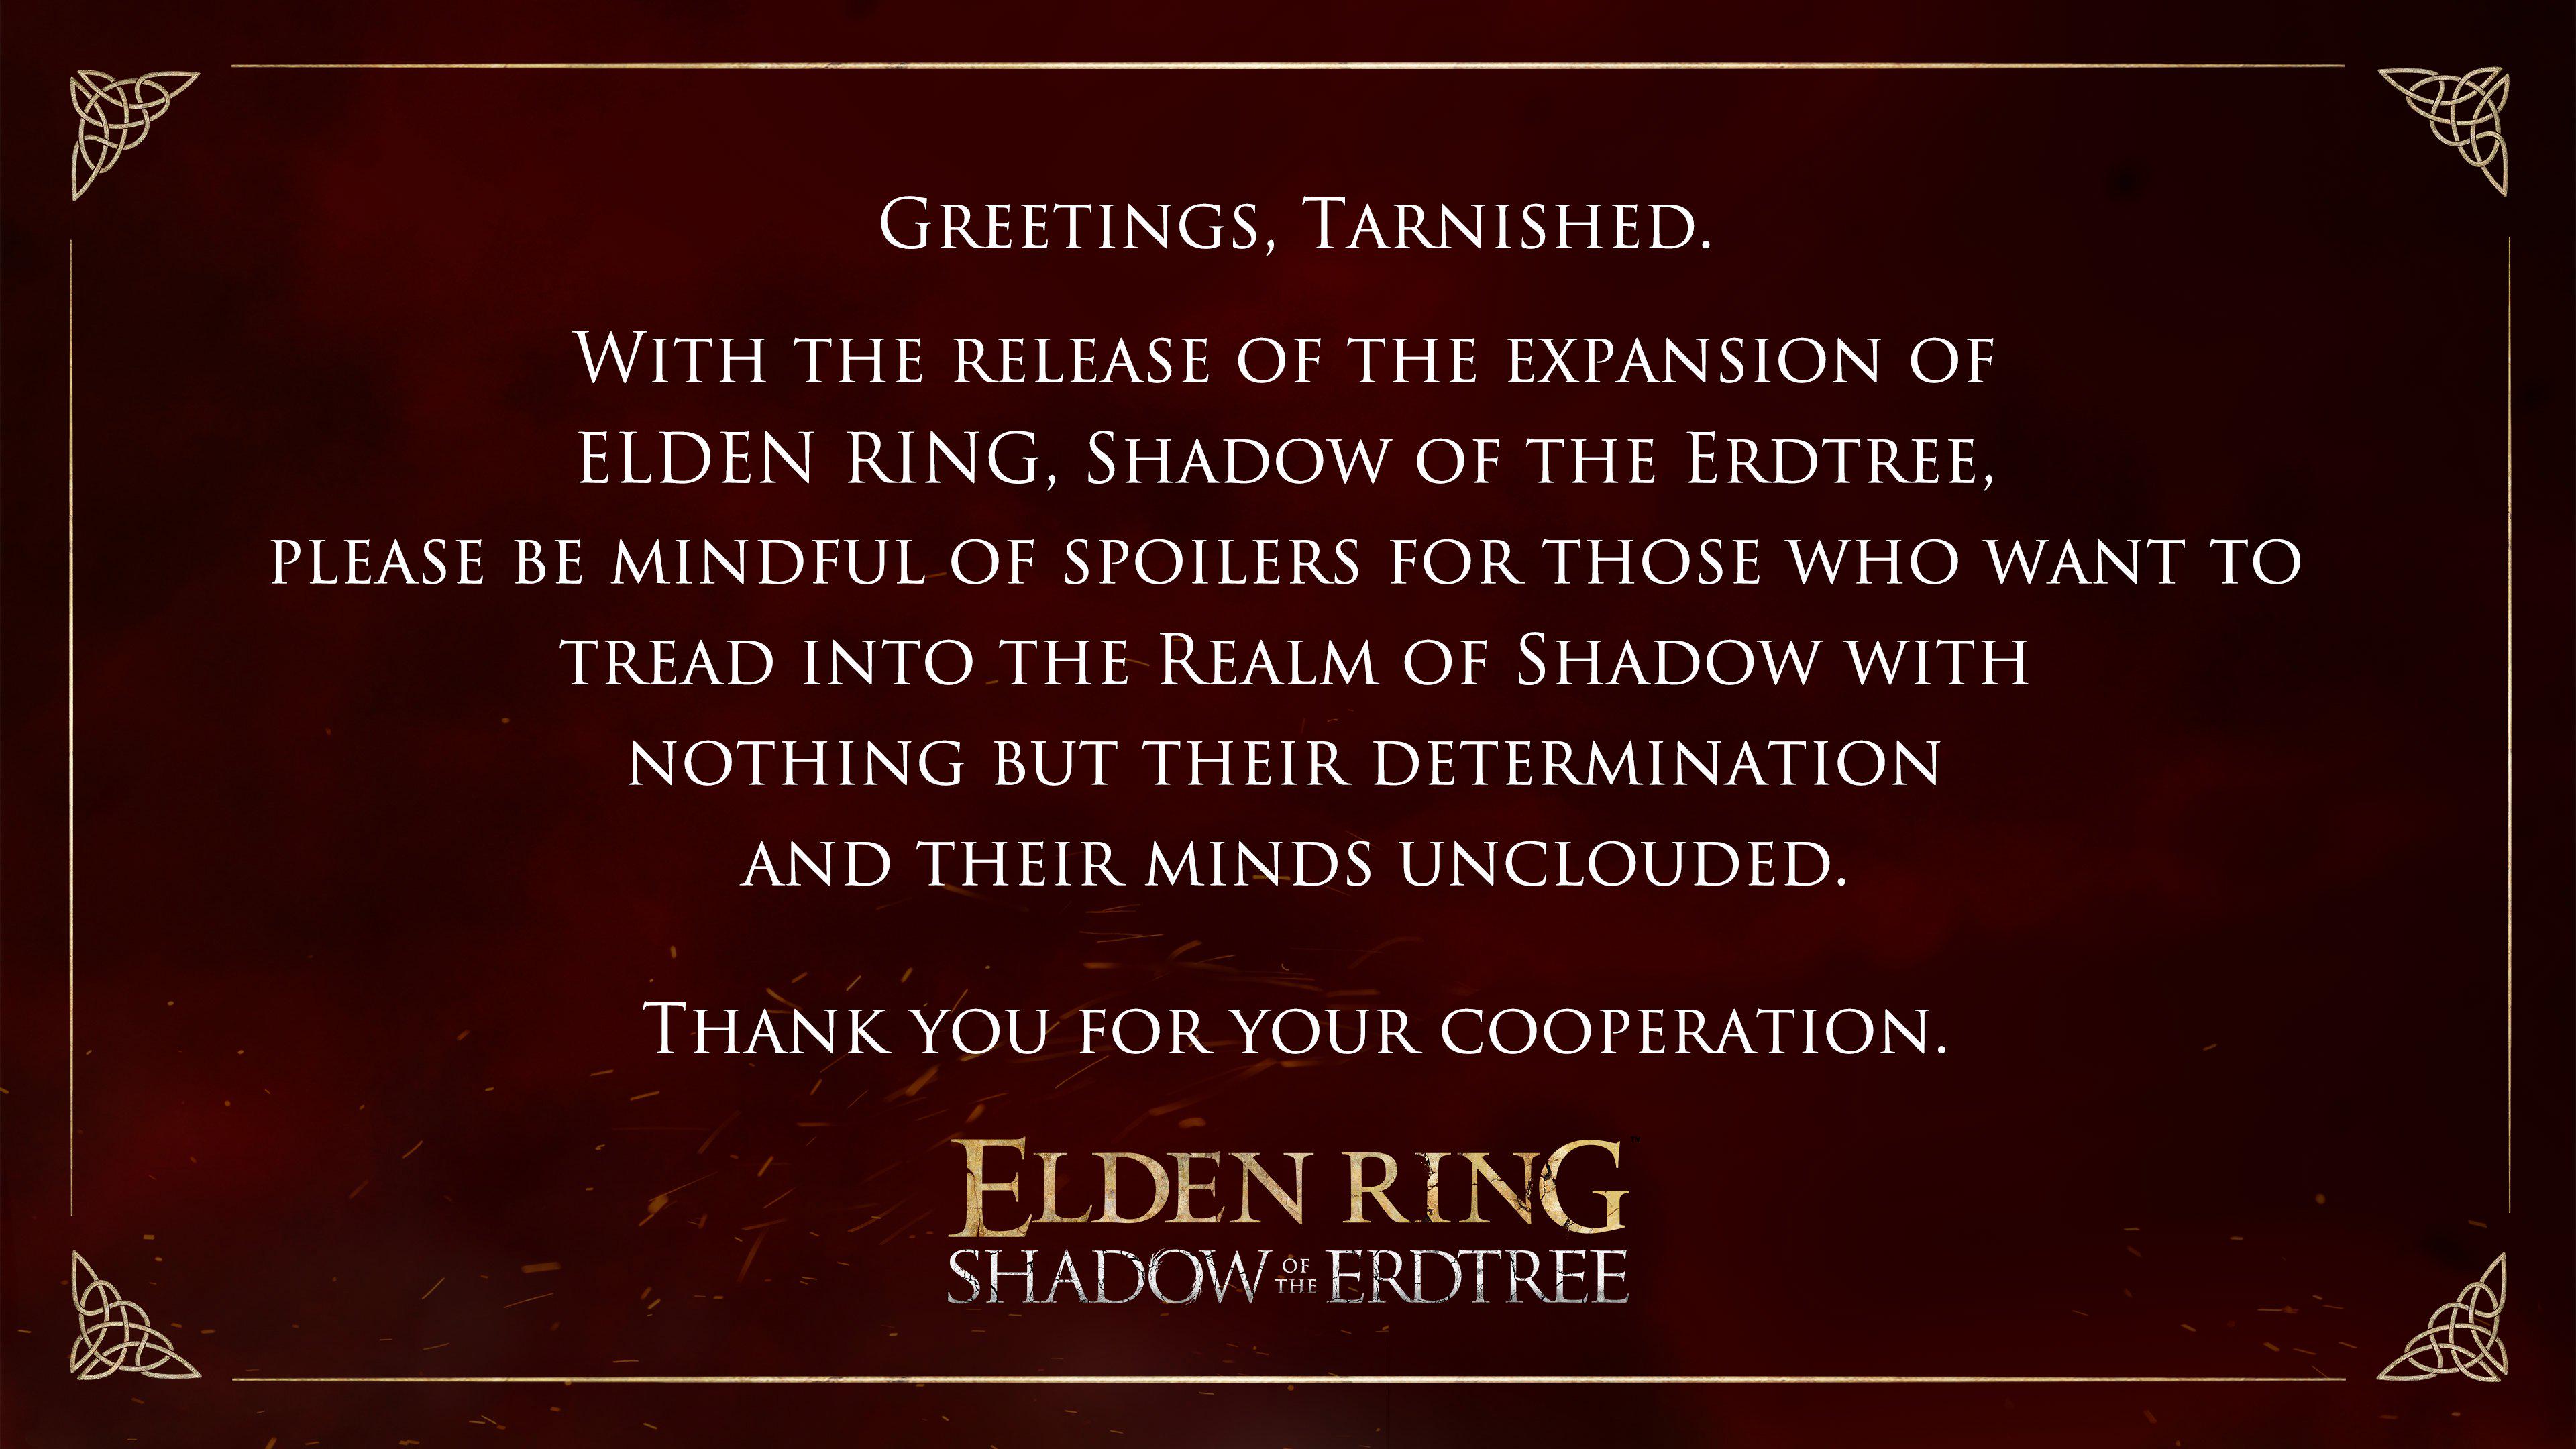 Greetings, Tarnished. With the release of the expansion of elden ring, shadow of the erdtree, please be mindful of spoilers for those who want to tread into the realm of shadow with nothing but their determination and their minds unclouded. Thank you for your cooperation.